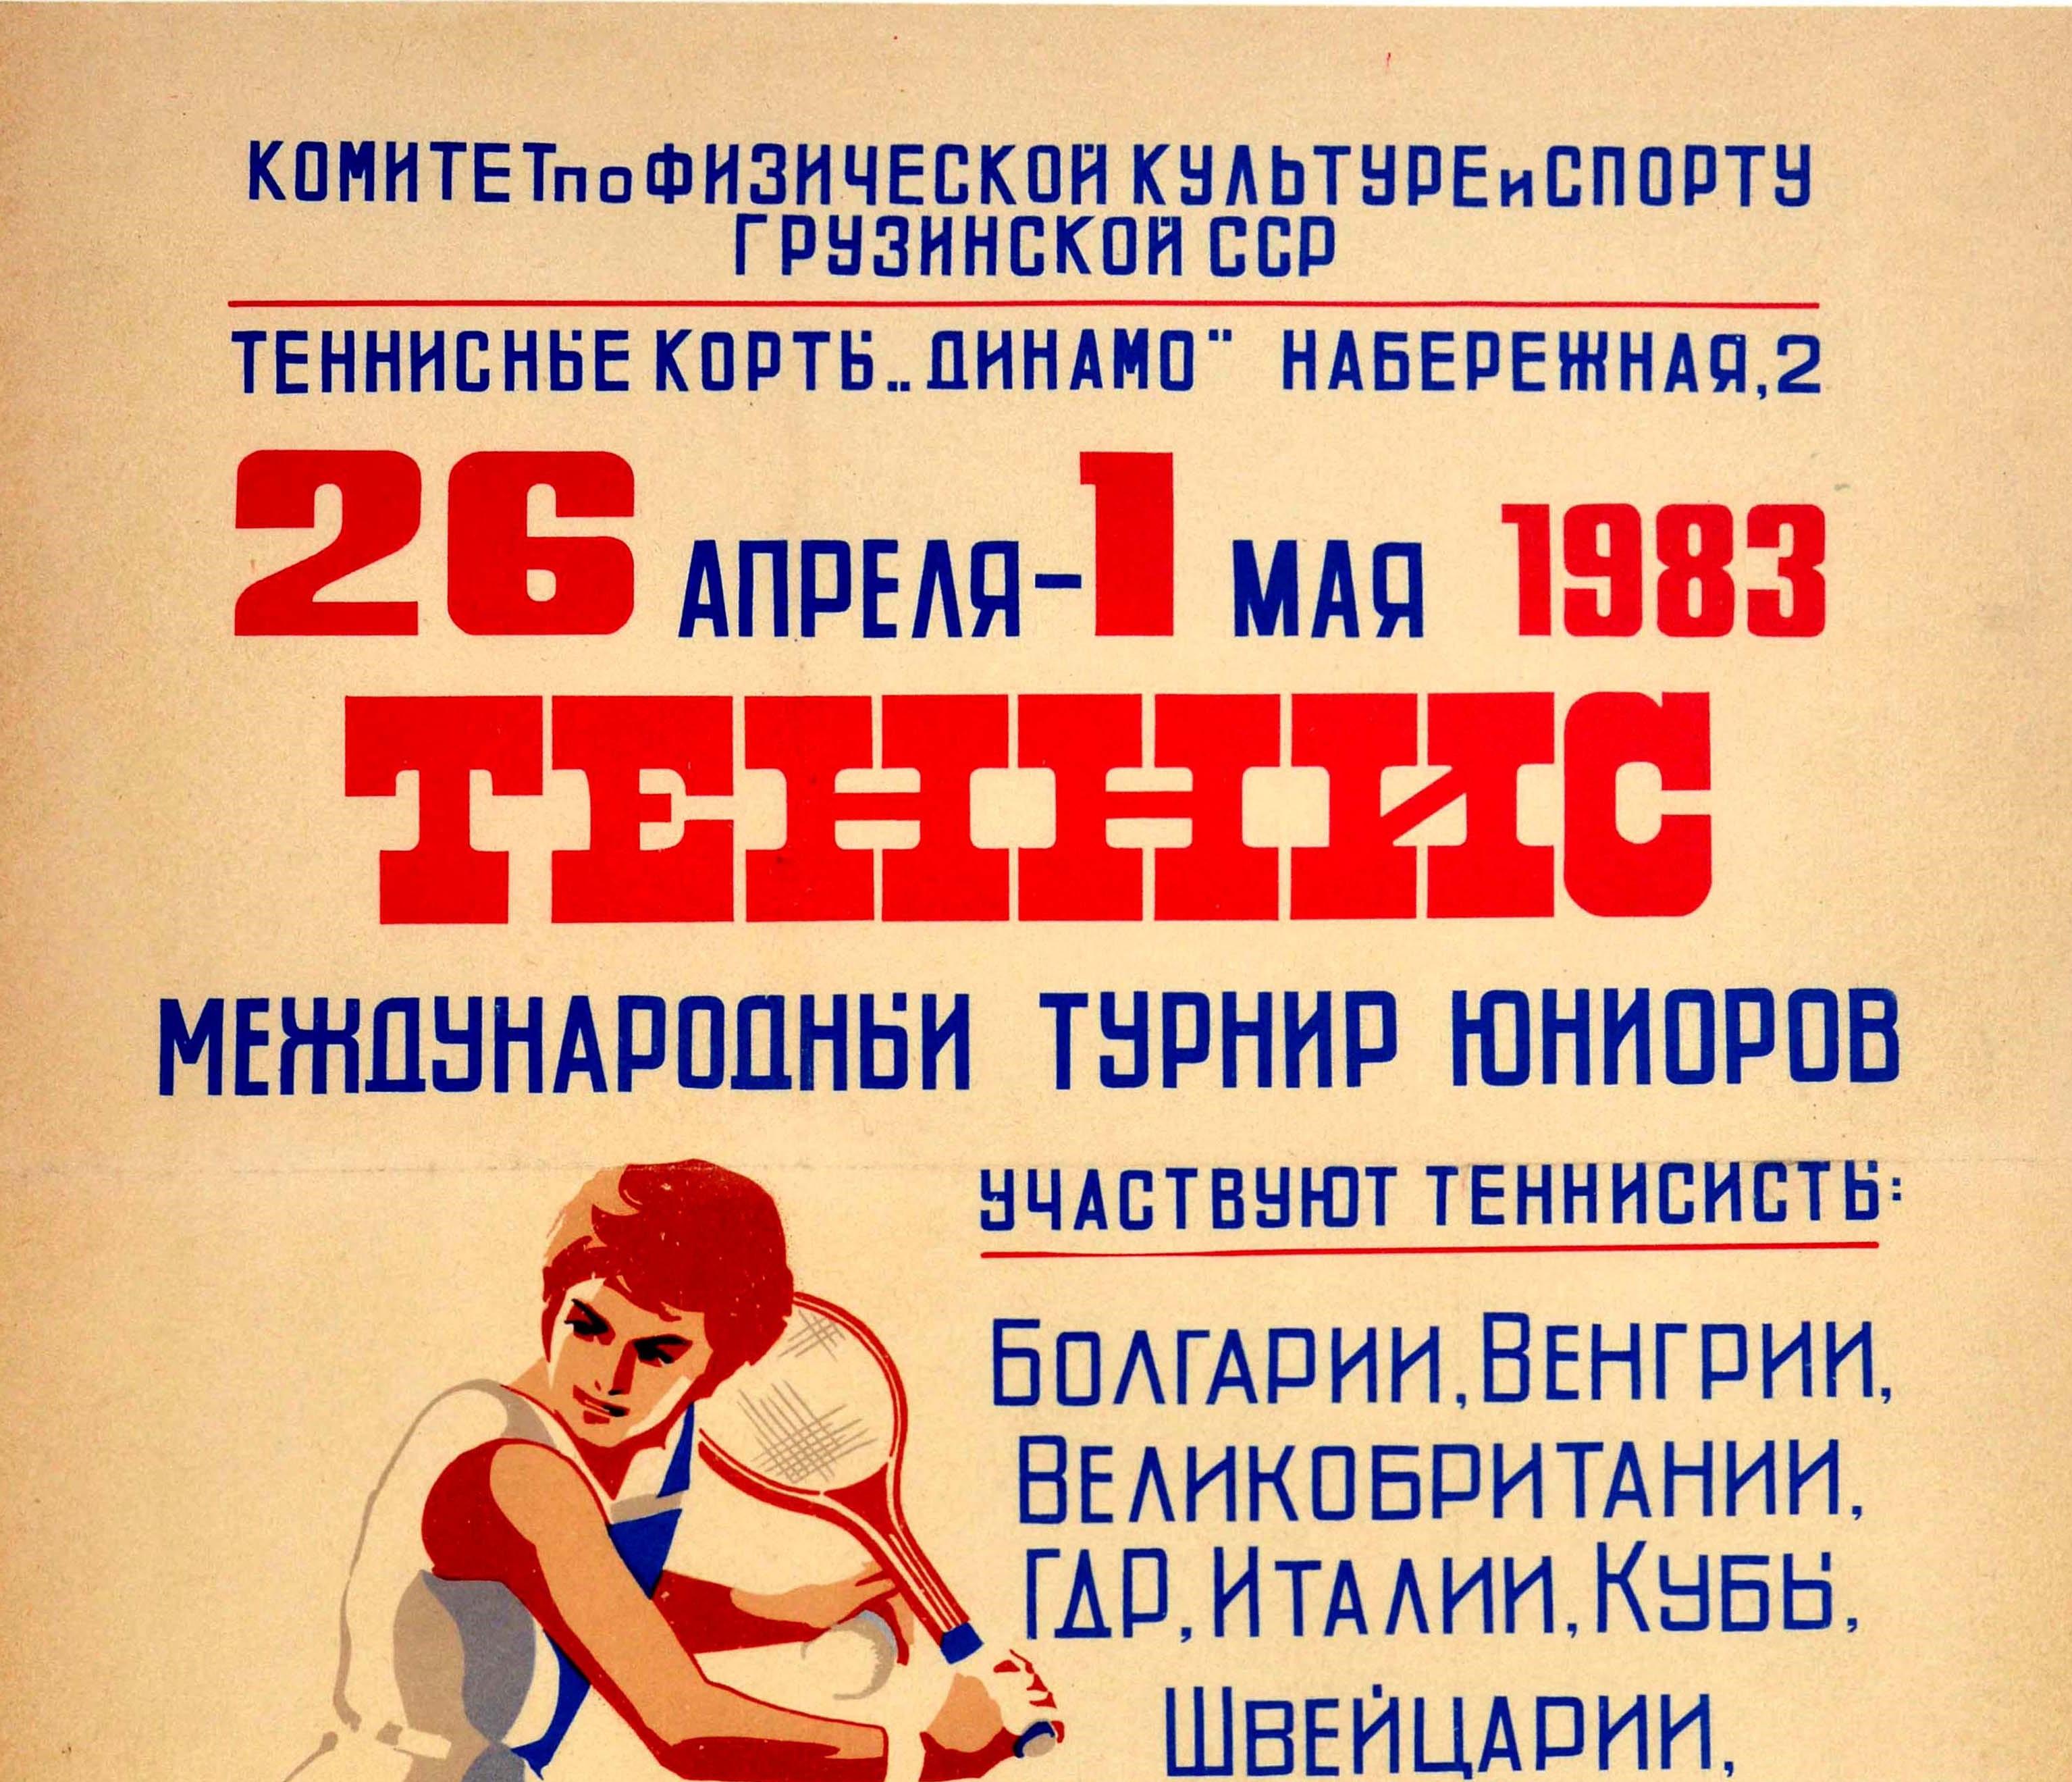 Original vintage Soviet sport poster for an International Junior Tennis Tournament from 26 April-1 May 1983 at the Dynamo tennis court in Tbilisi Georgia featuring a great design of a girl swinging a tennis racquet / racket on the side with the text